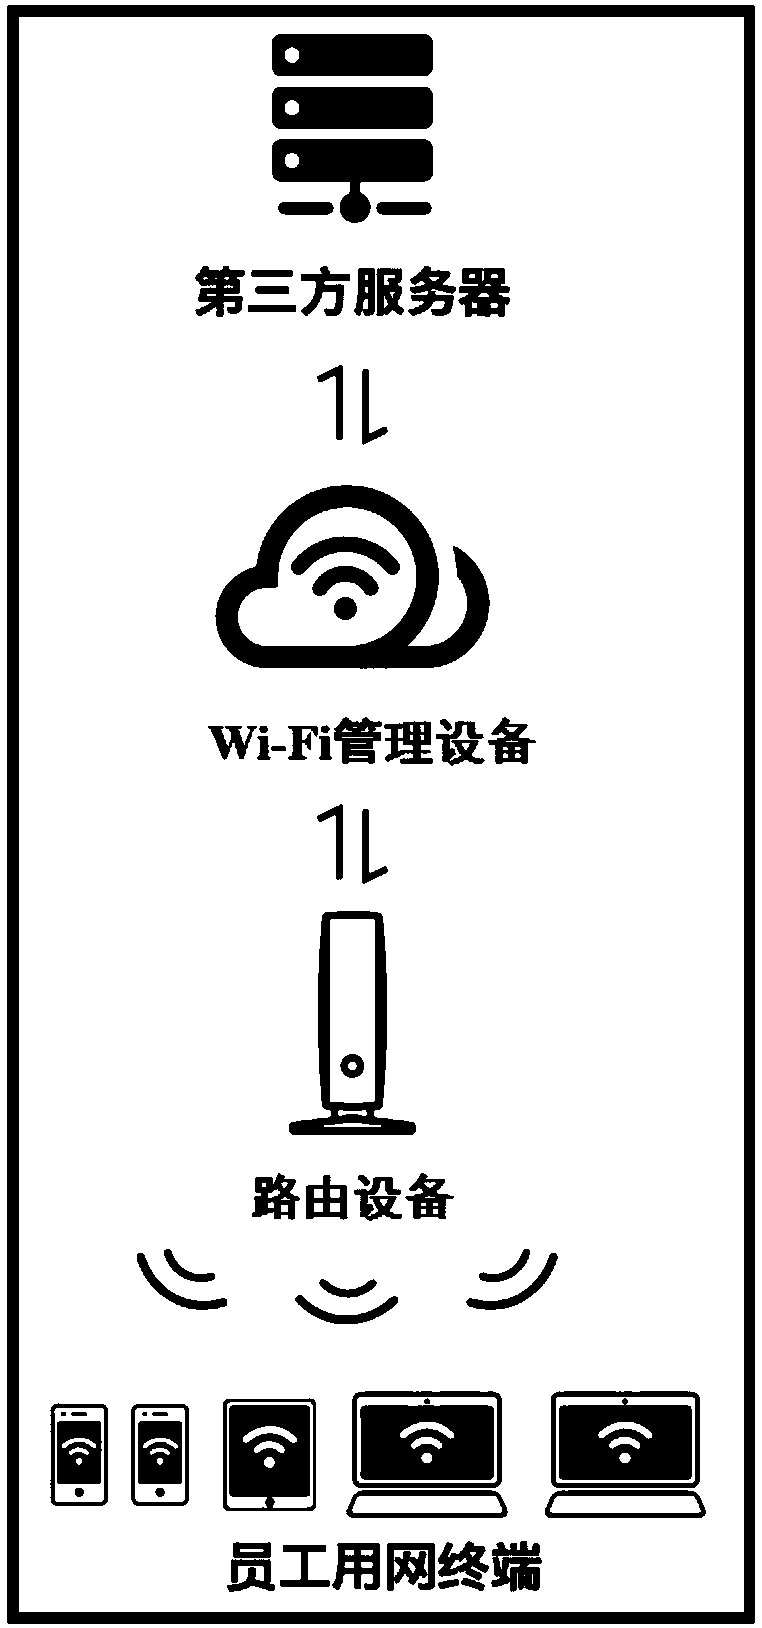 Intelligent security Wi-Fi management method and system